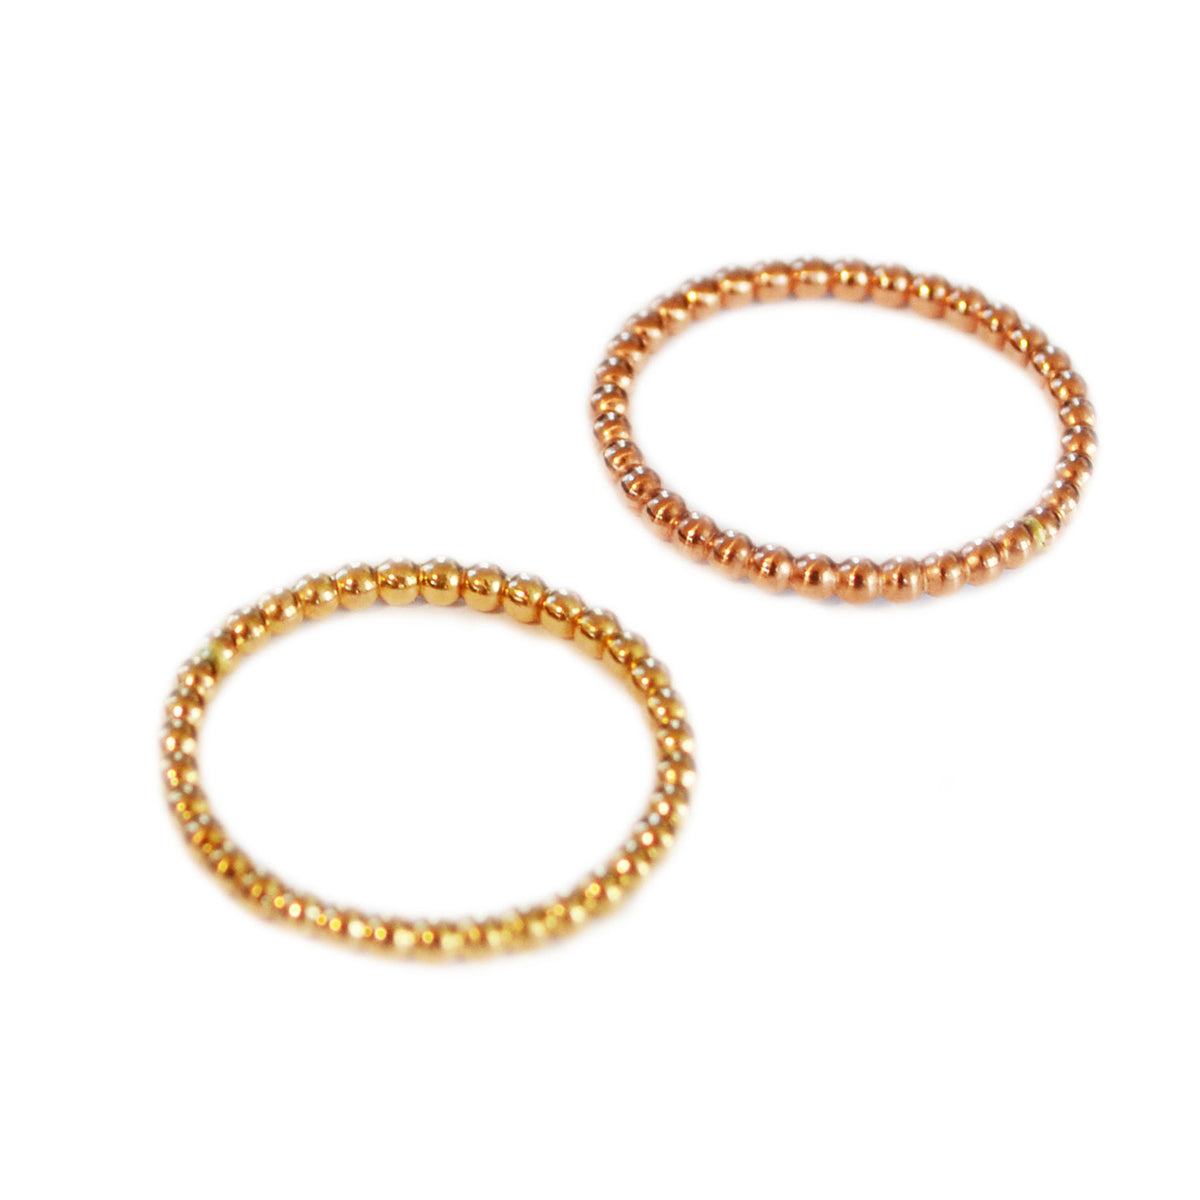 Beaded Stacking Ring, Gold, Rose Gold, or Silver